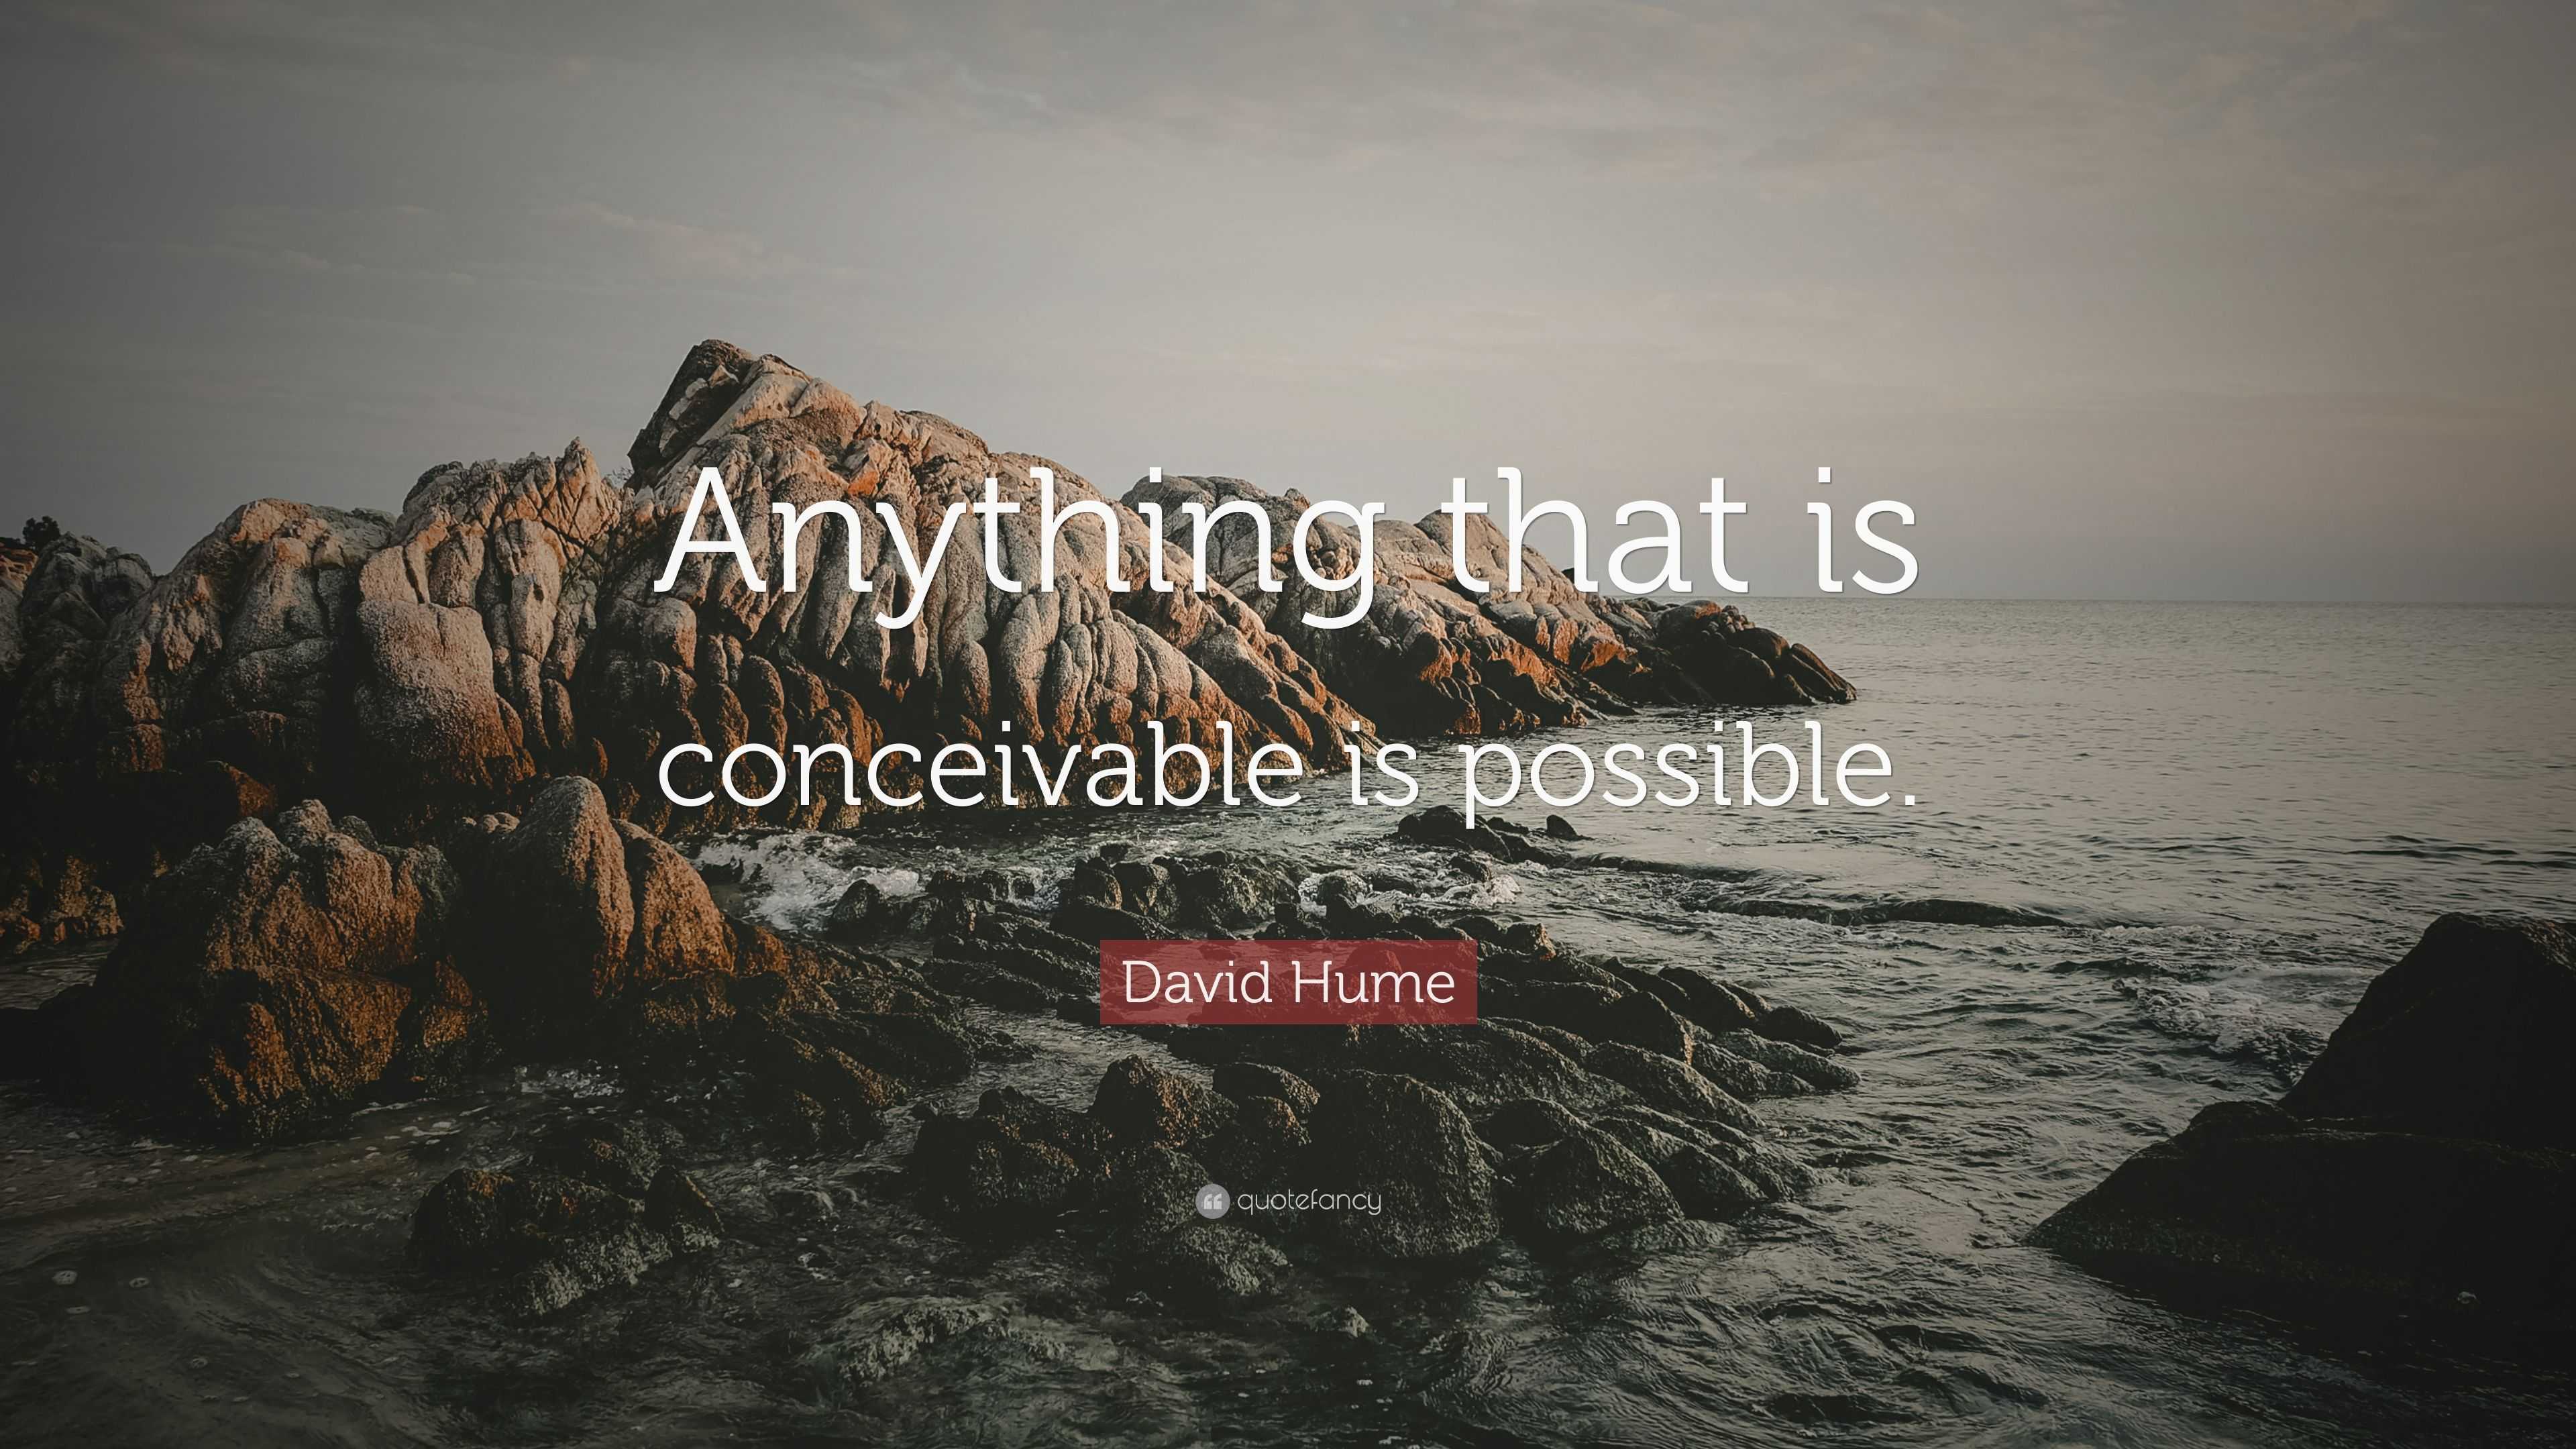 David Hume Quote: “Anything that is conceivable is possible.”